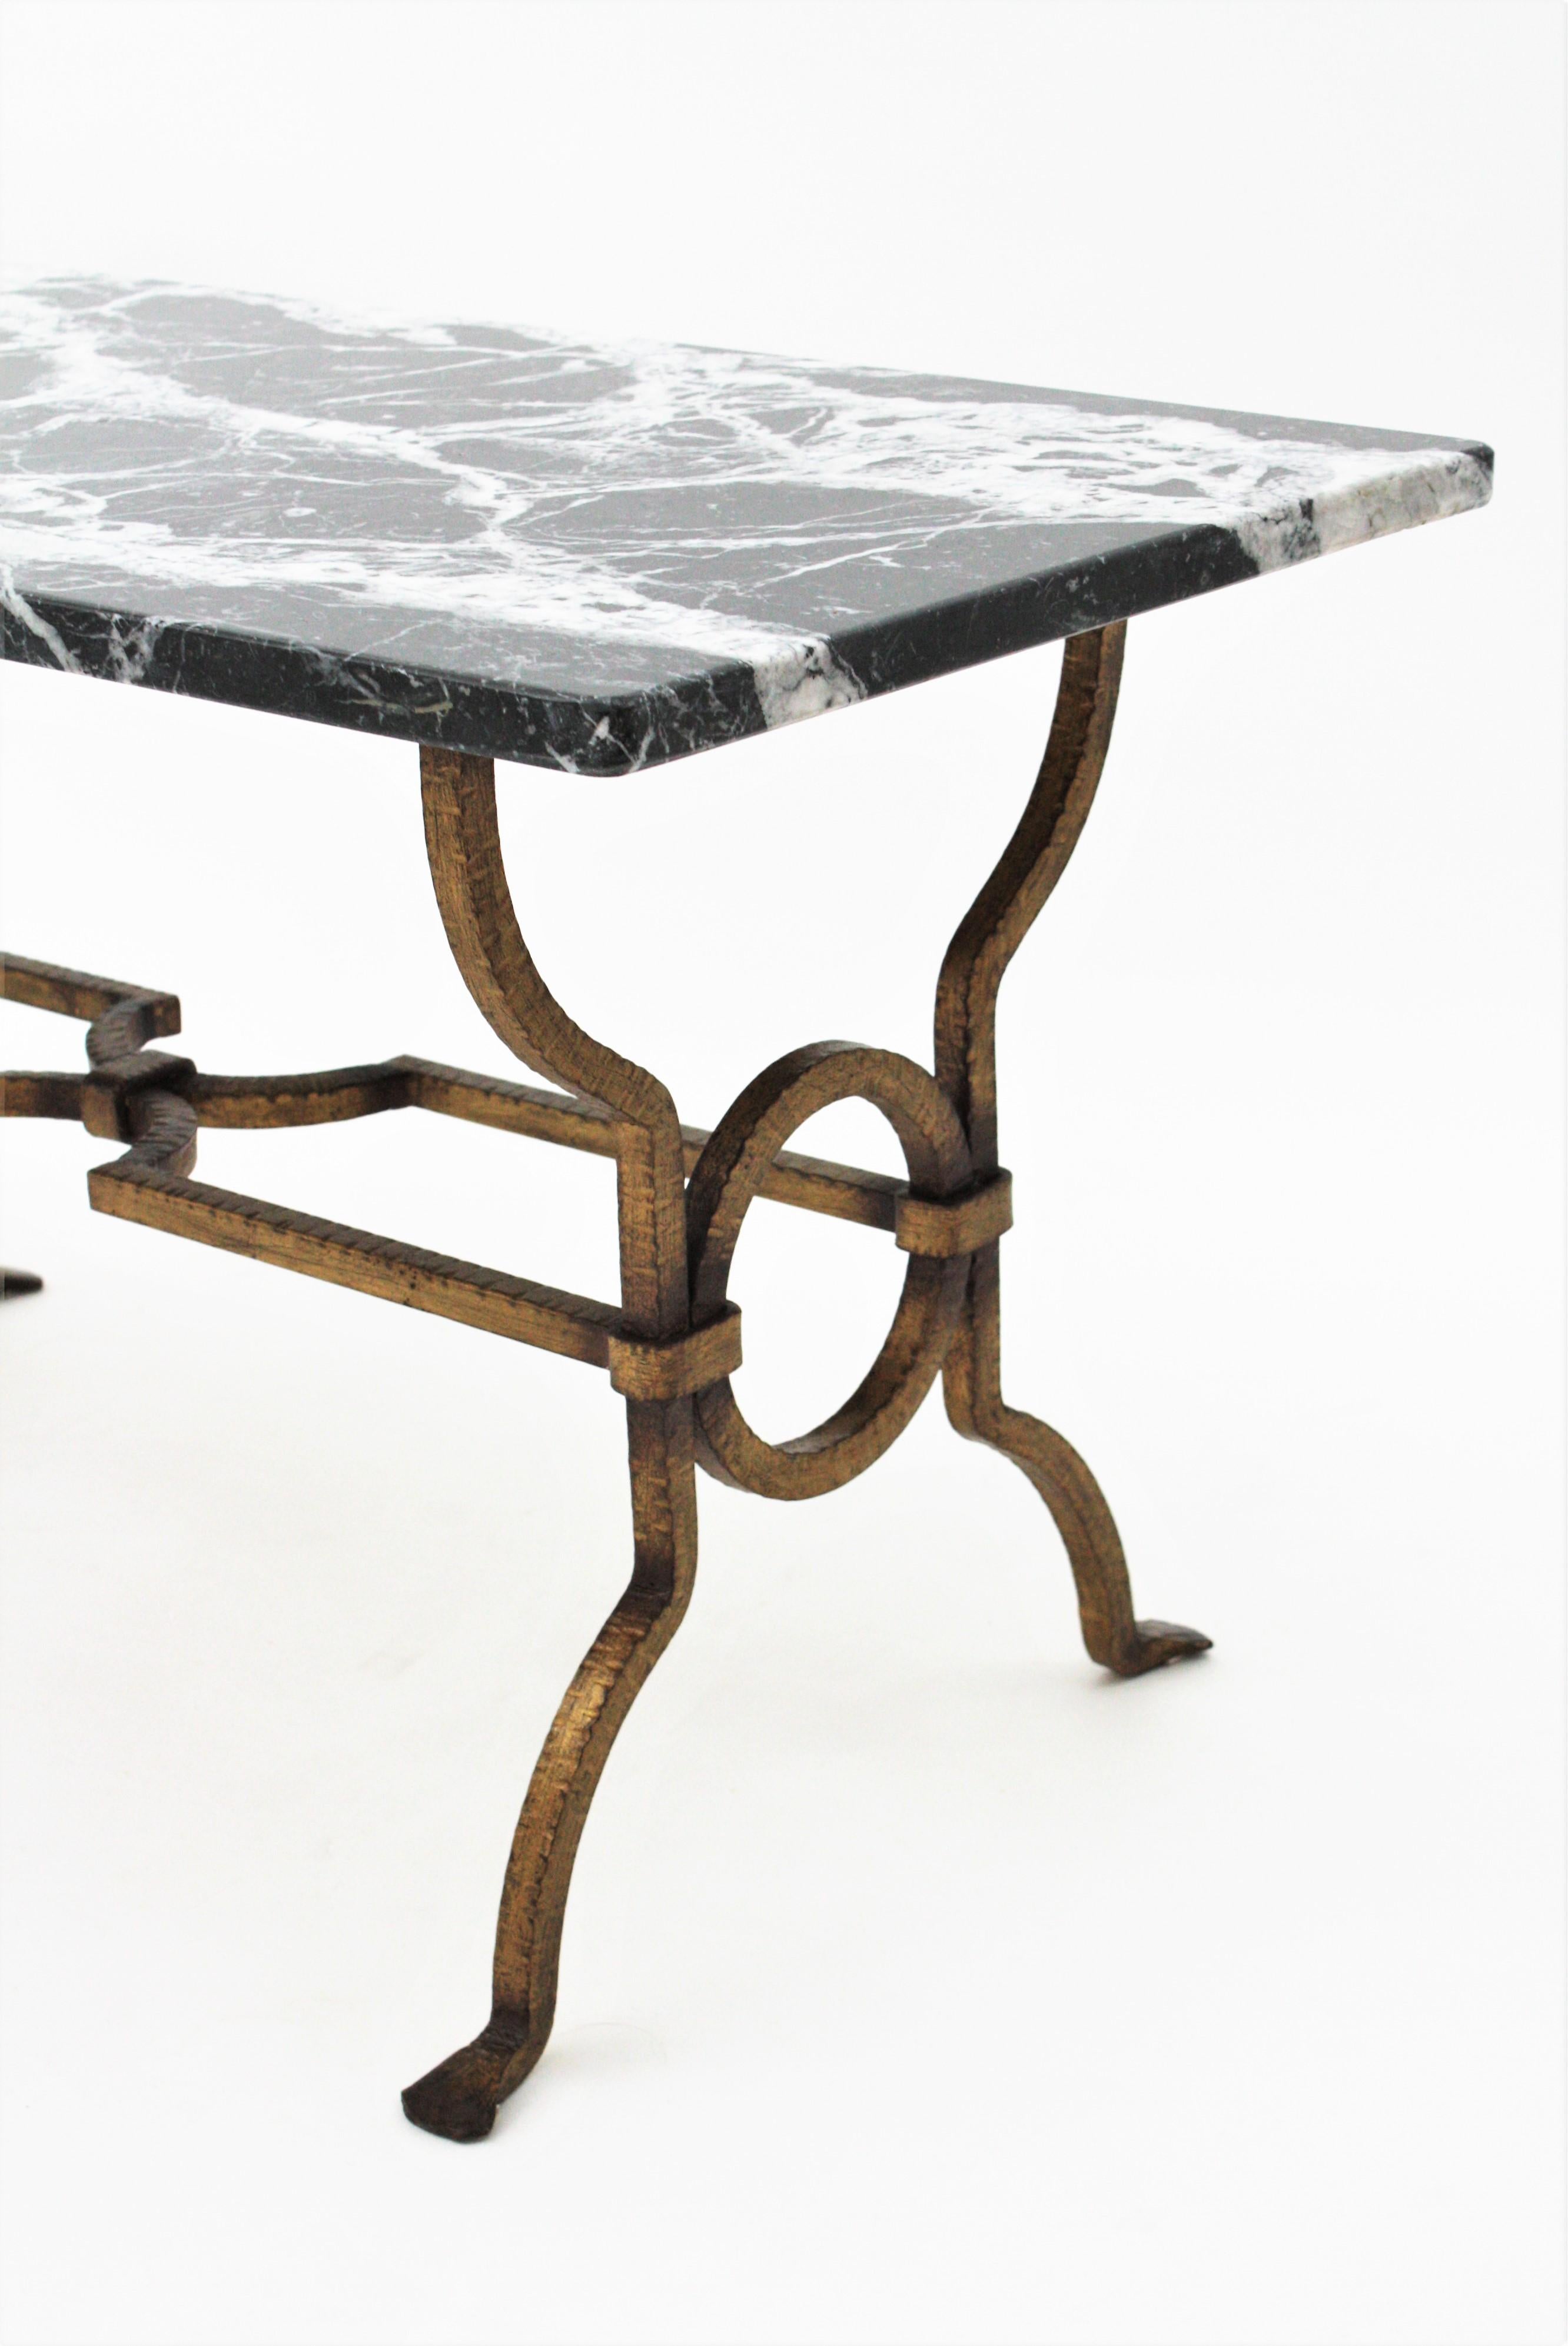 20th Century Gilbert Poillerat Gilt Iron Coffee Table with Black and White Marble Top